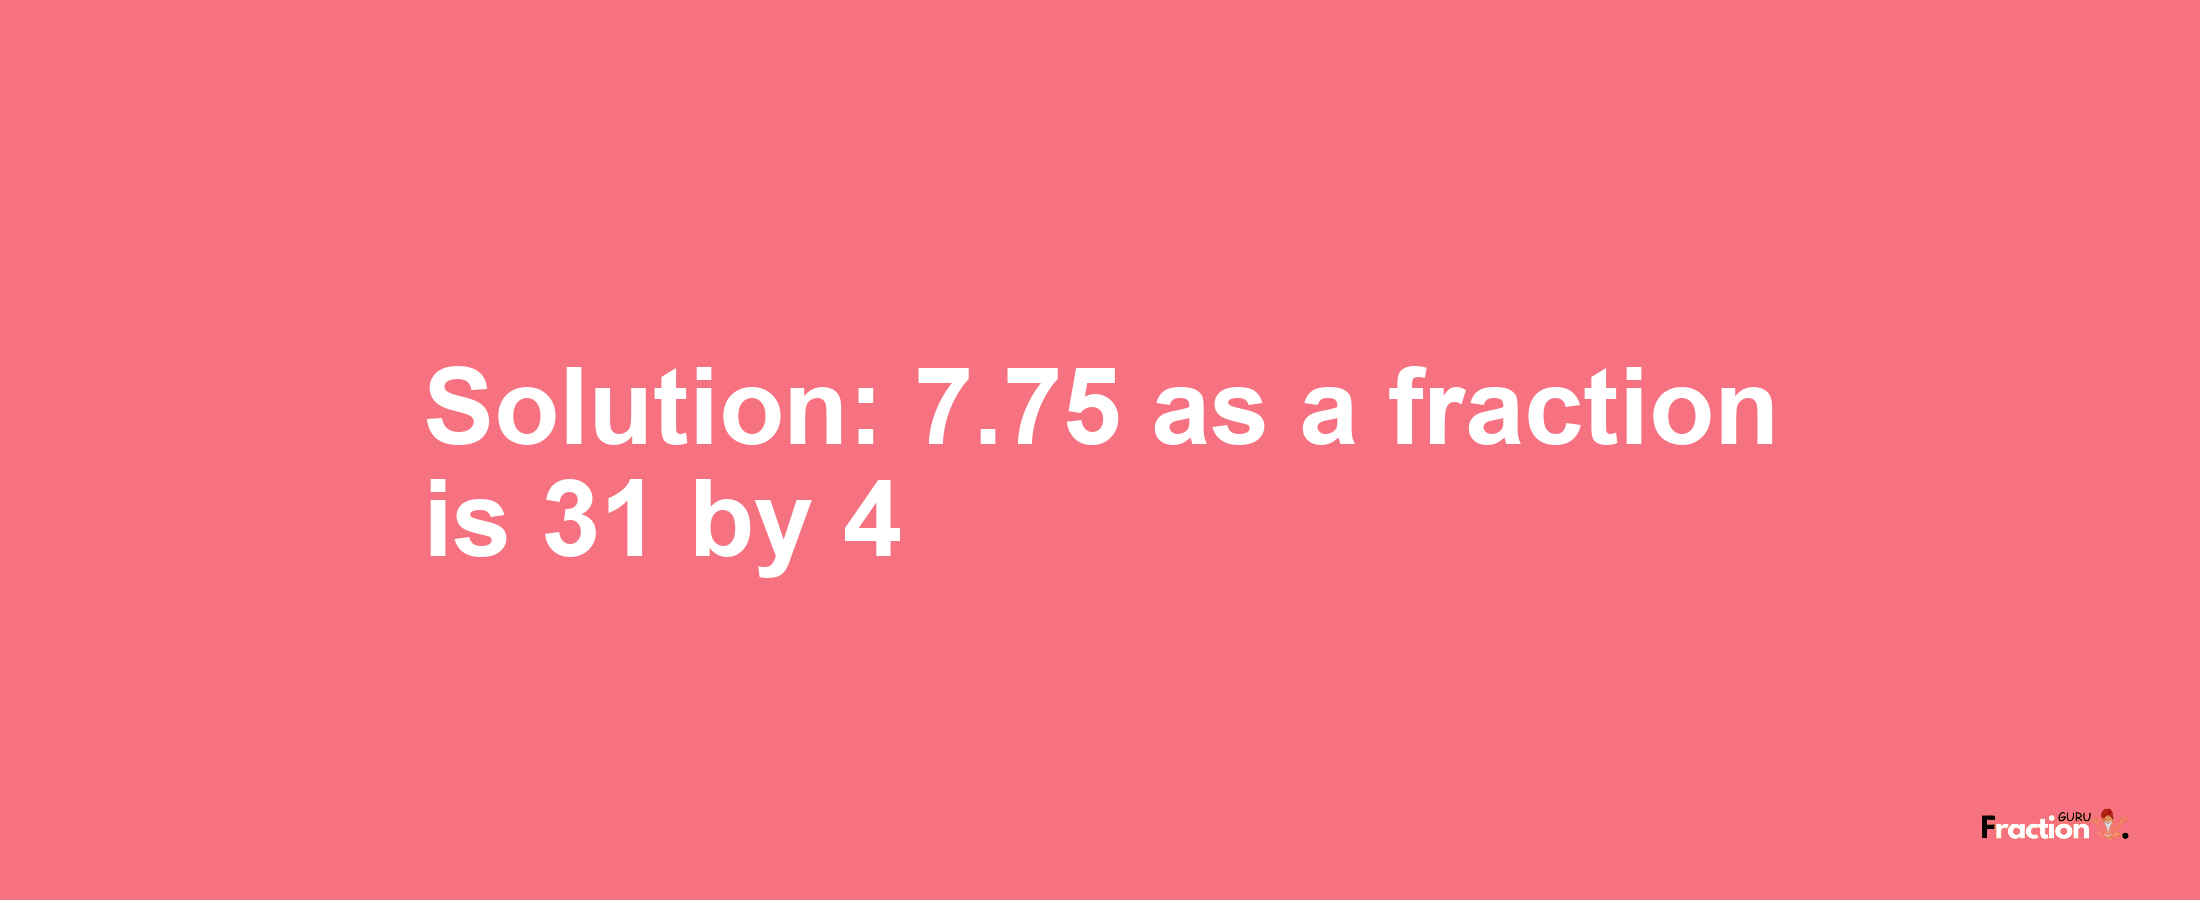 Solution:7.75 as a fraction is 31/4